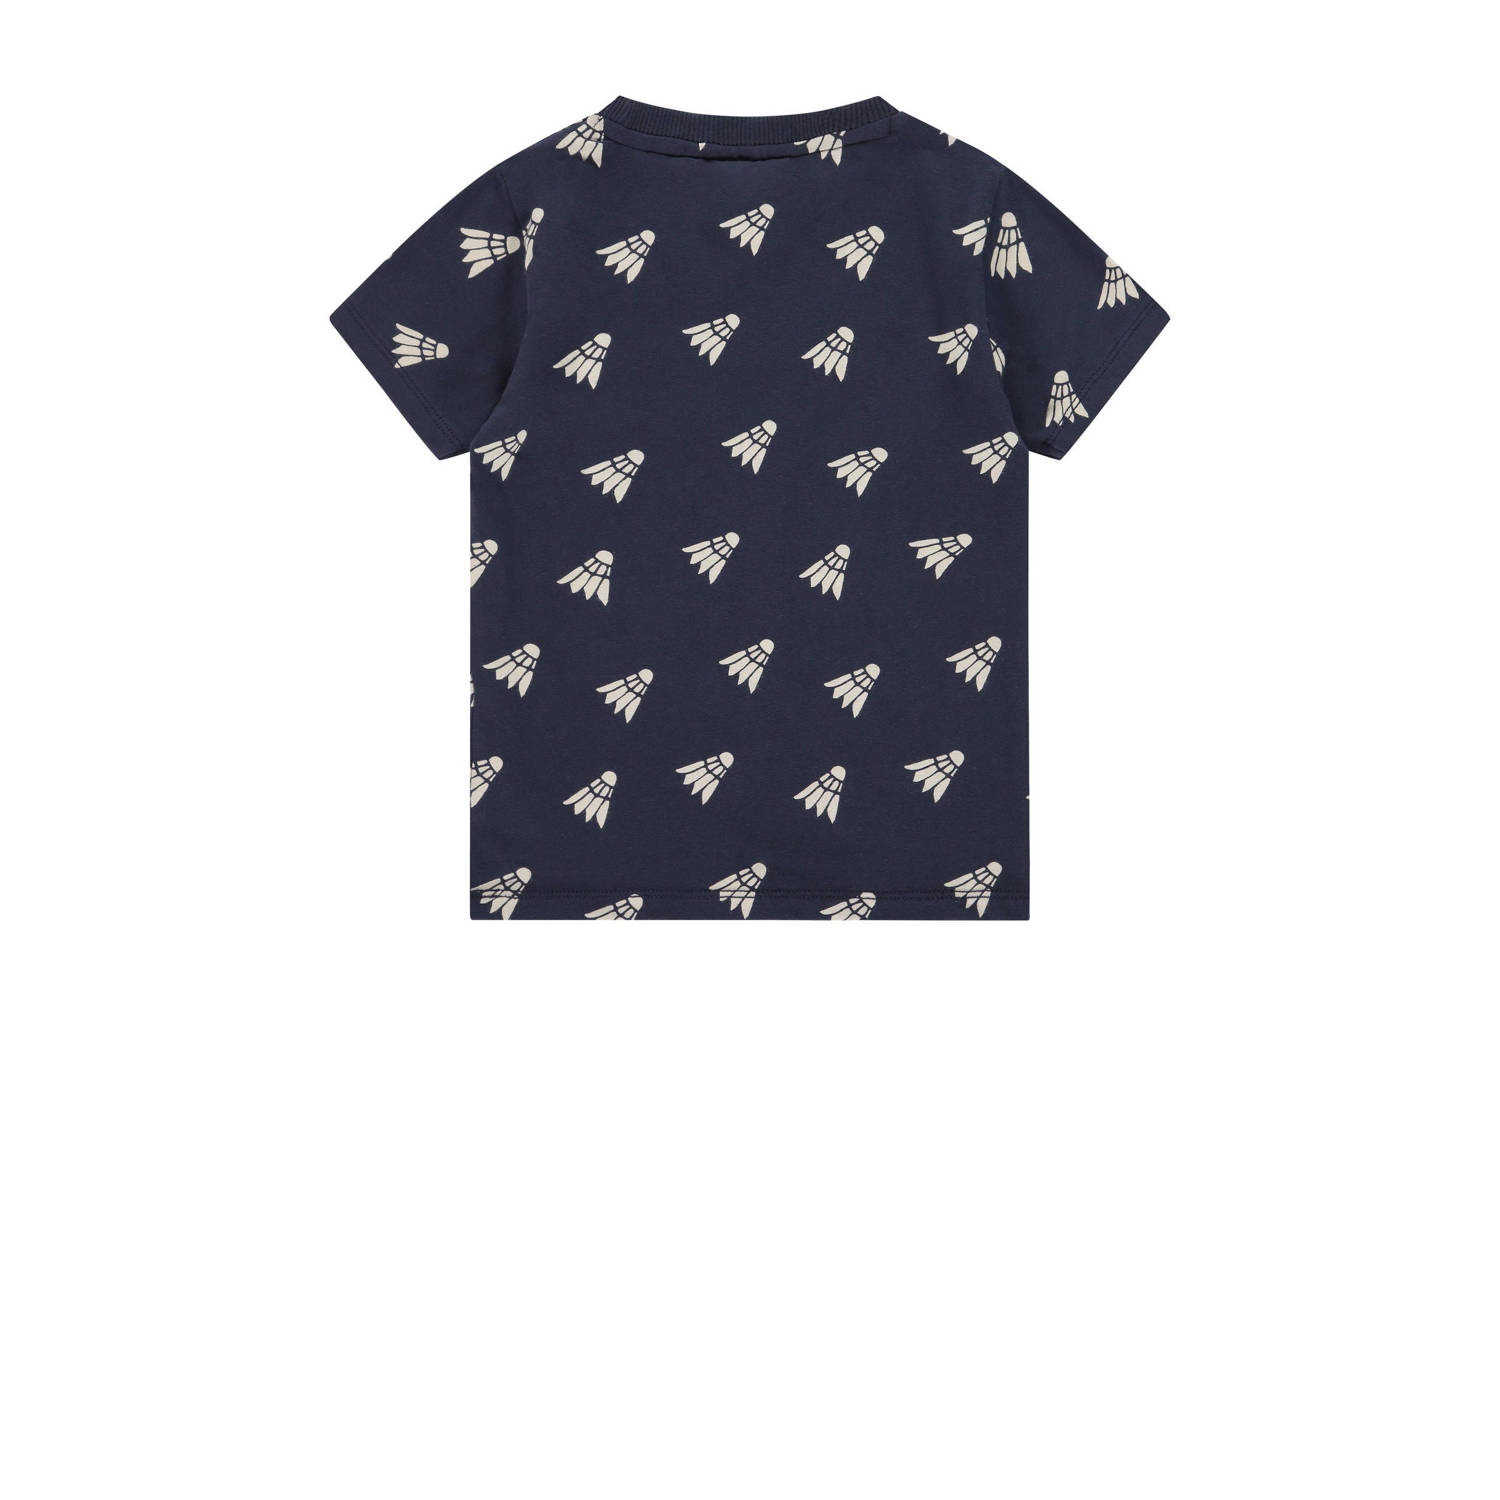 Stains&Stories T-shirt met all over print donkerblauw ecru